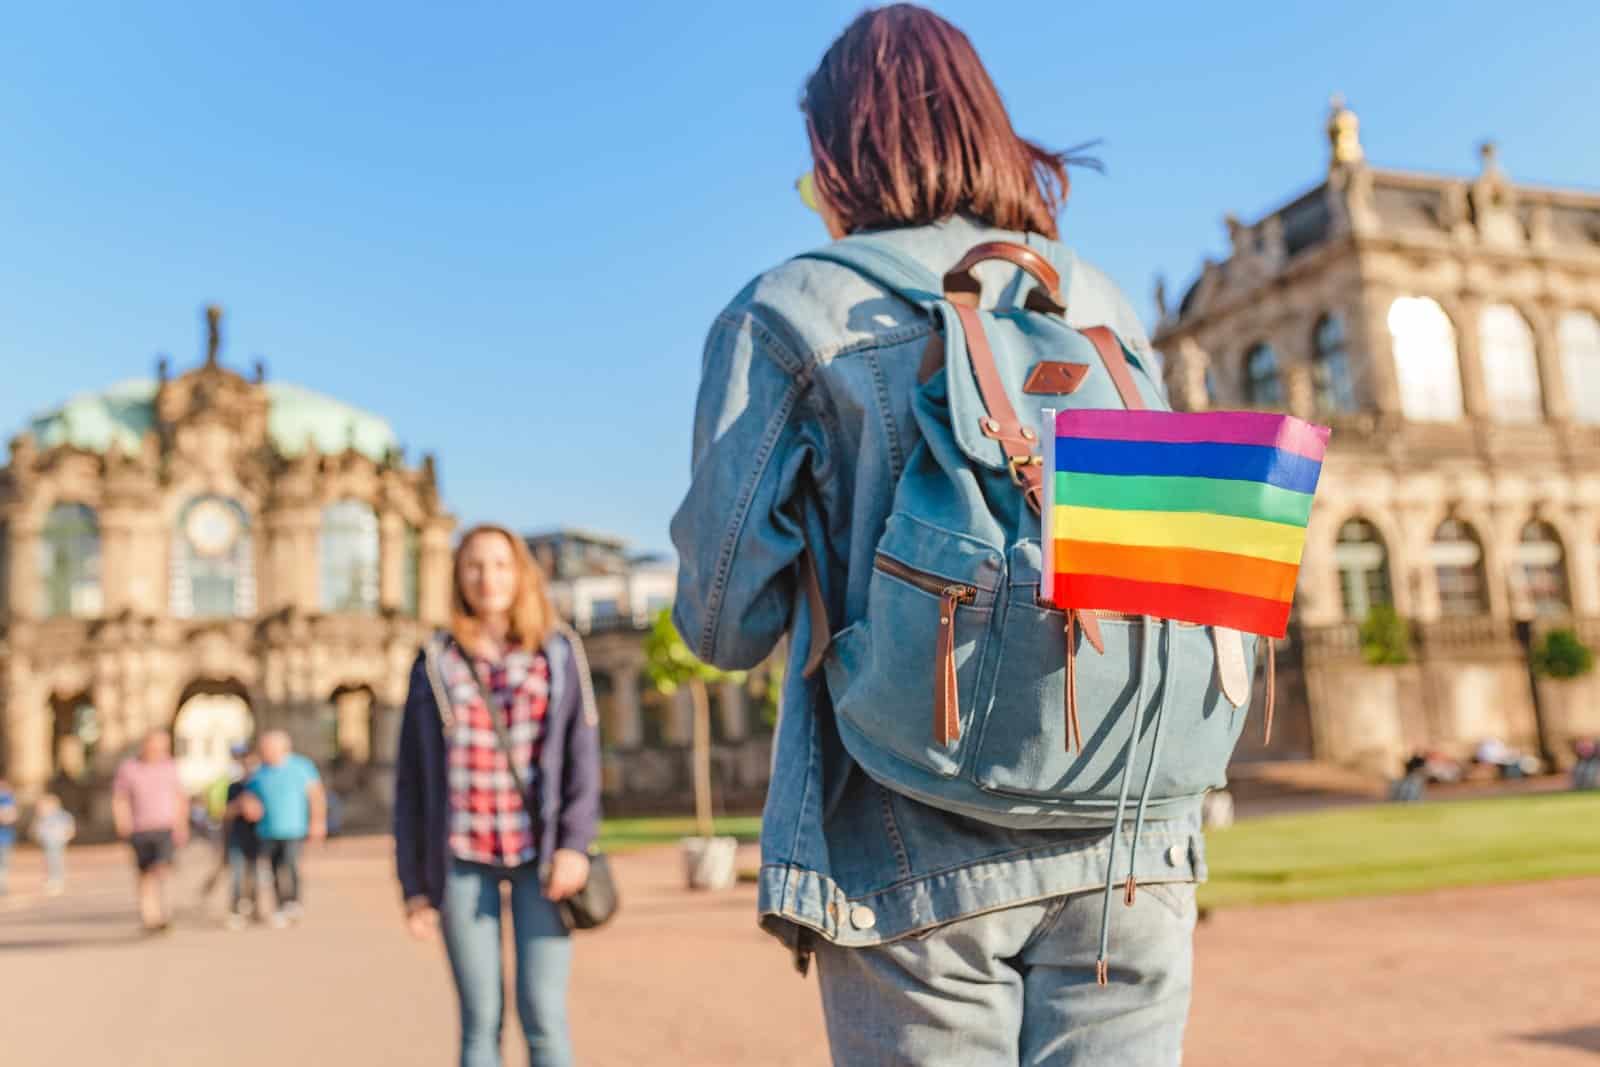 <p class="wp-caption-text">Image Credit: Shutterstock / frantic00</p>  <p>Education is key to understanding, and trans travelers are educating the industry on the importance of sensitivity training, cultural competency, and anti-discrimination policies. It’s not just about creating a safe space for trans travelers but enriching the travel experience for everyone involved.</p>